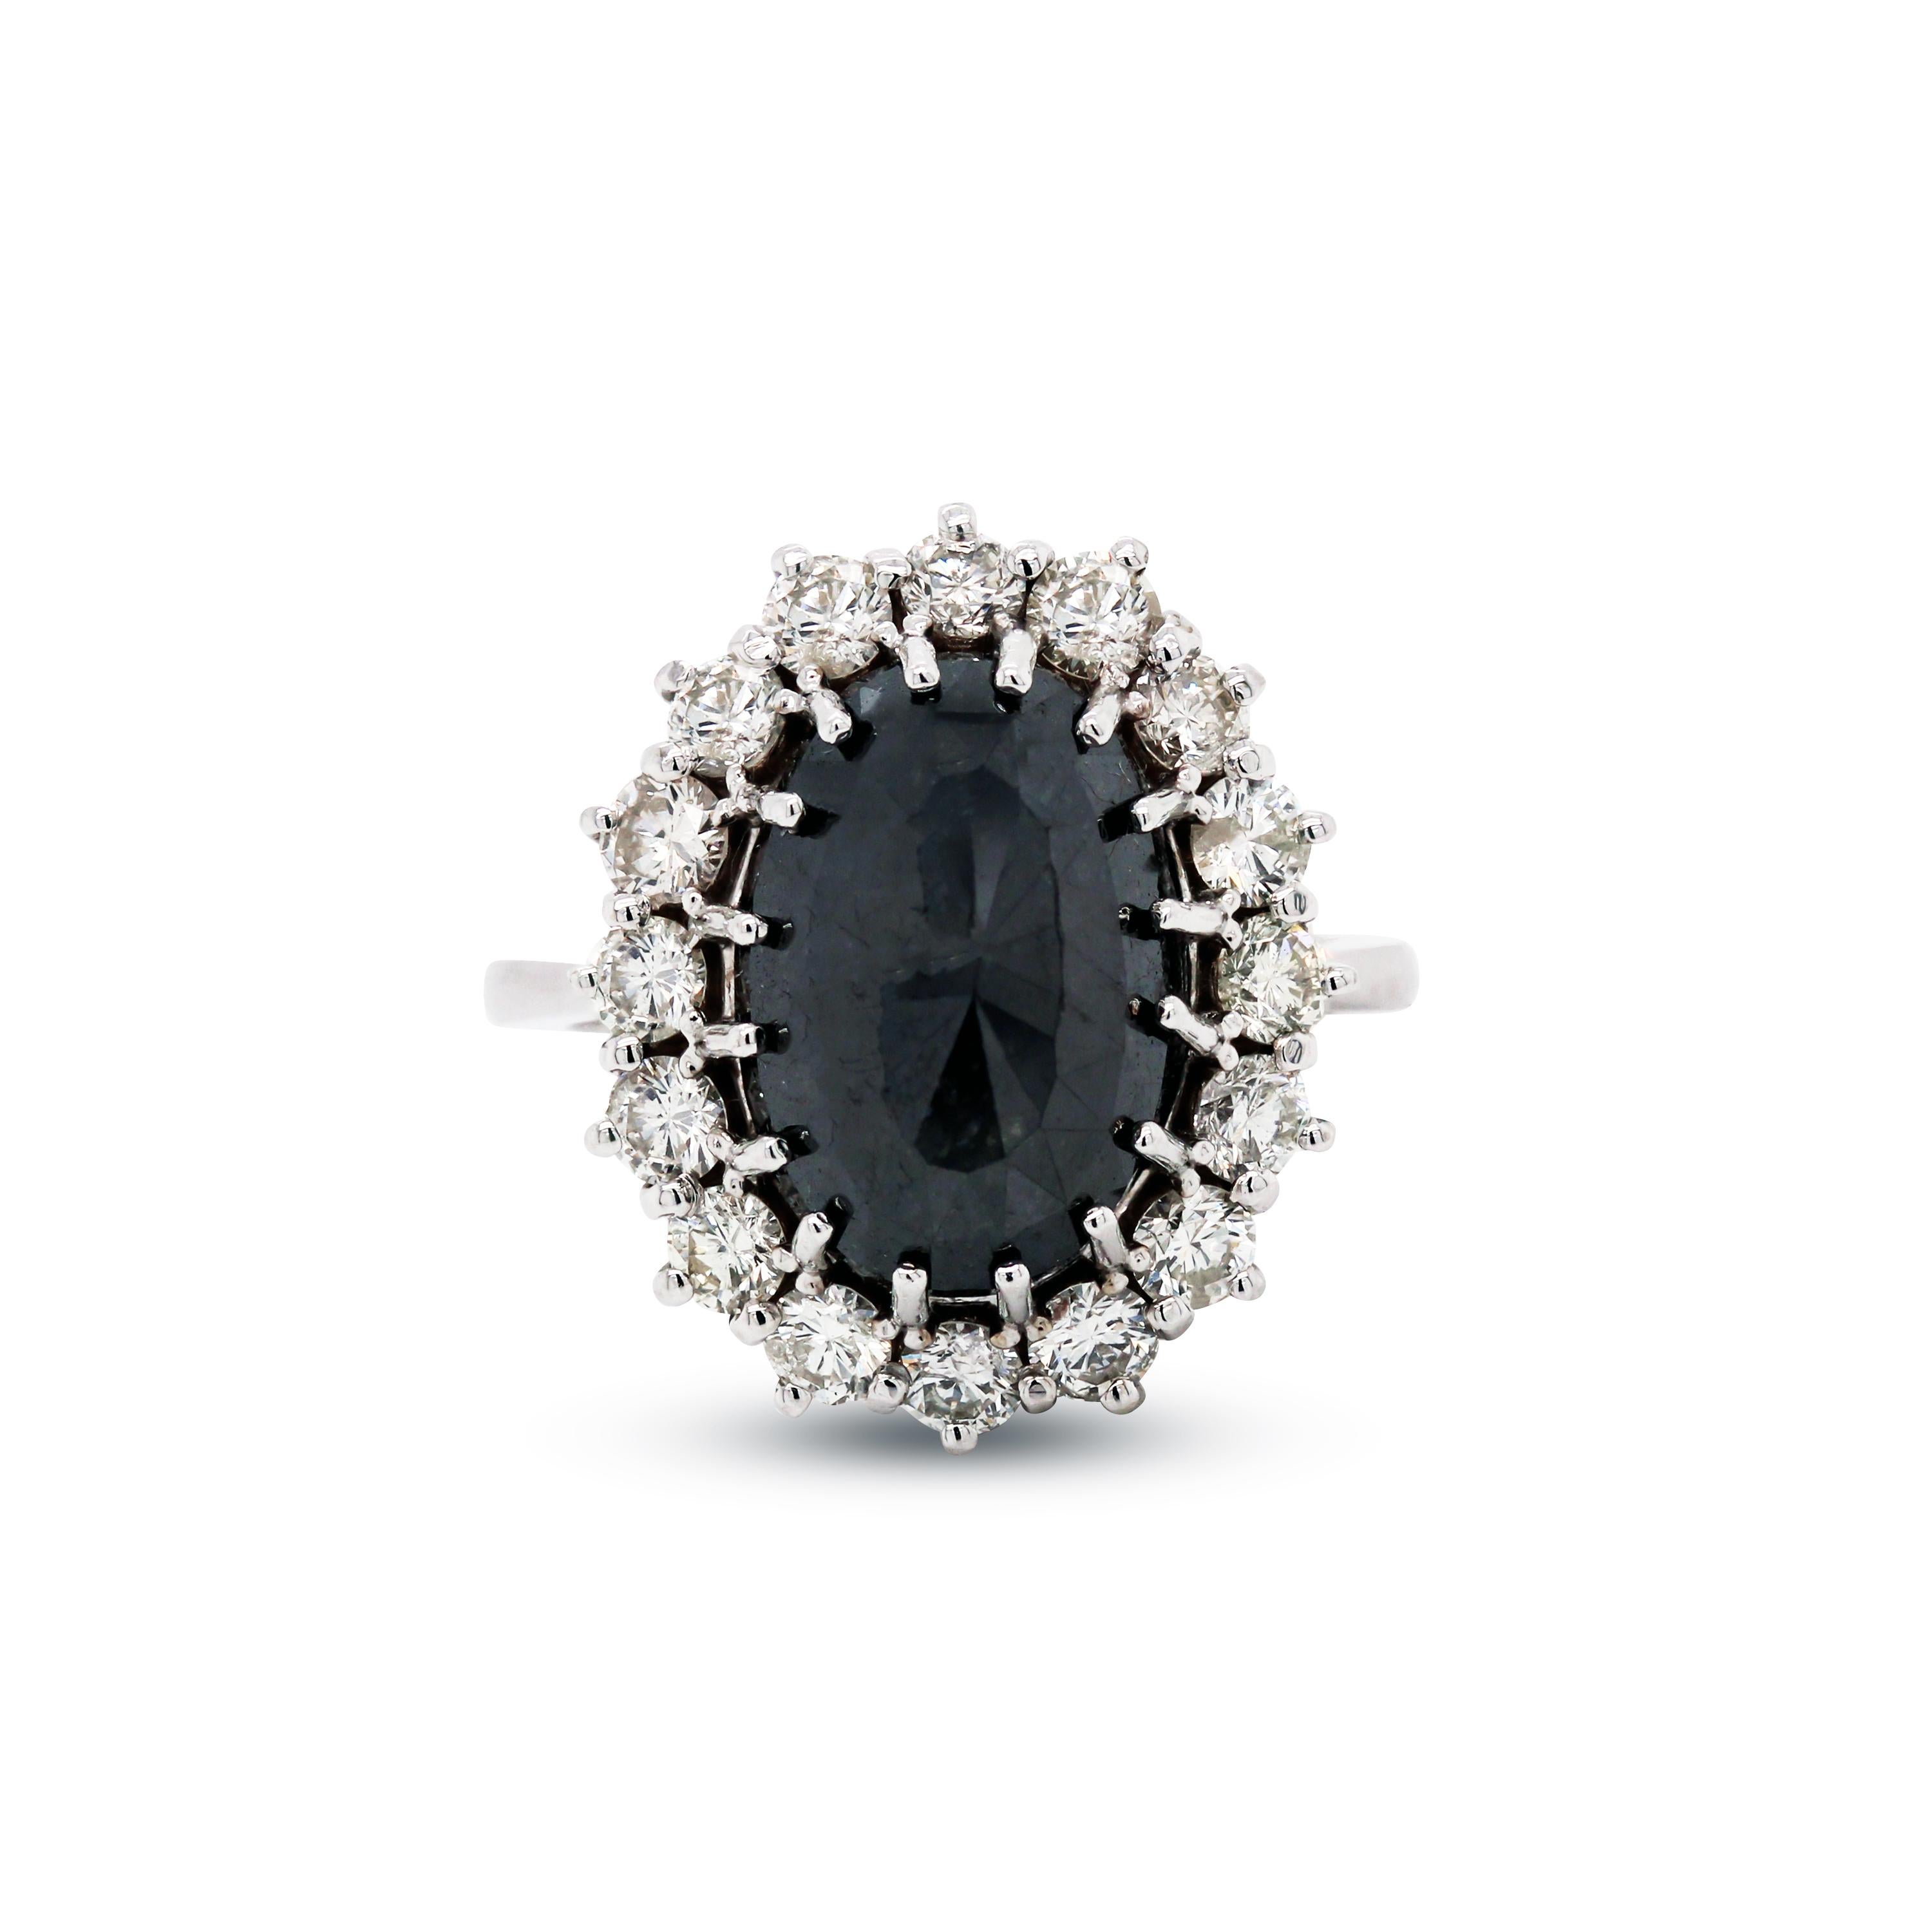 14K White Gold and Diamond Ring with Black Diamond Center

This Handmade ring features an incredibly sized black diamond center prong set with diamonds set all around

Black diamond is oval-cut, 8.70 carat

1 carat G color, VS clarity diamonds total